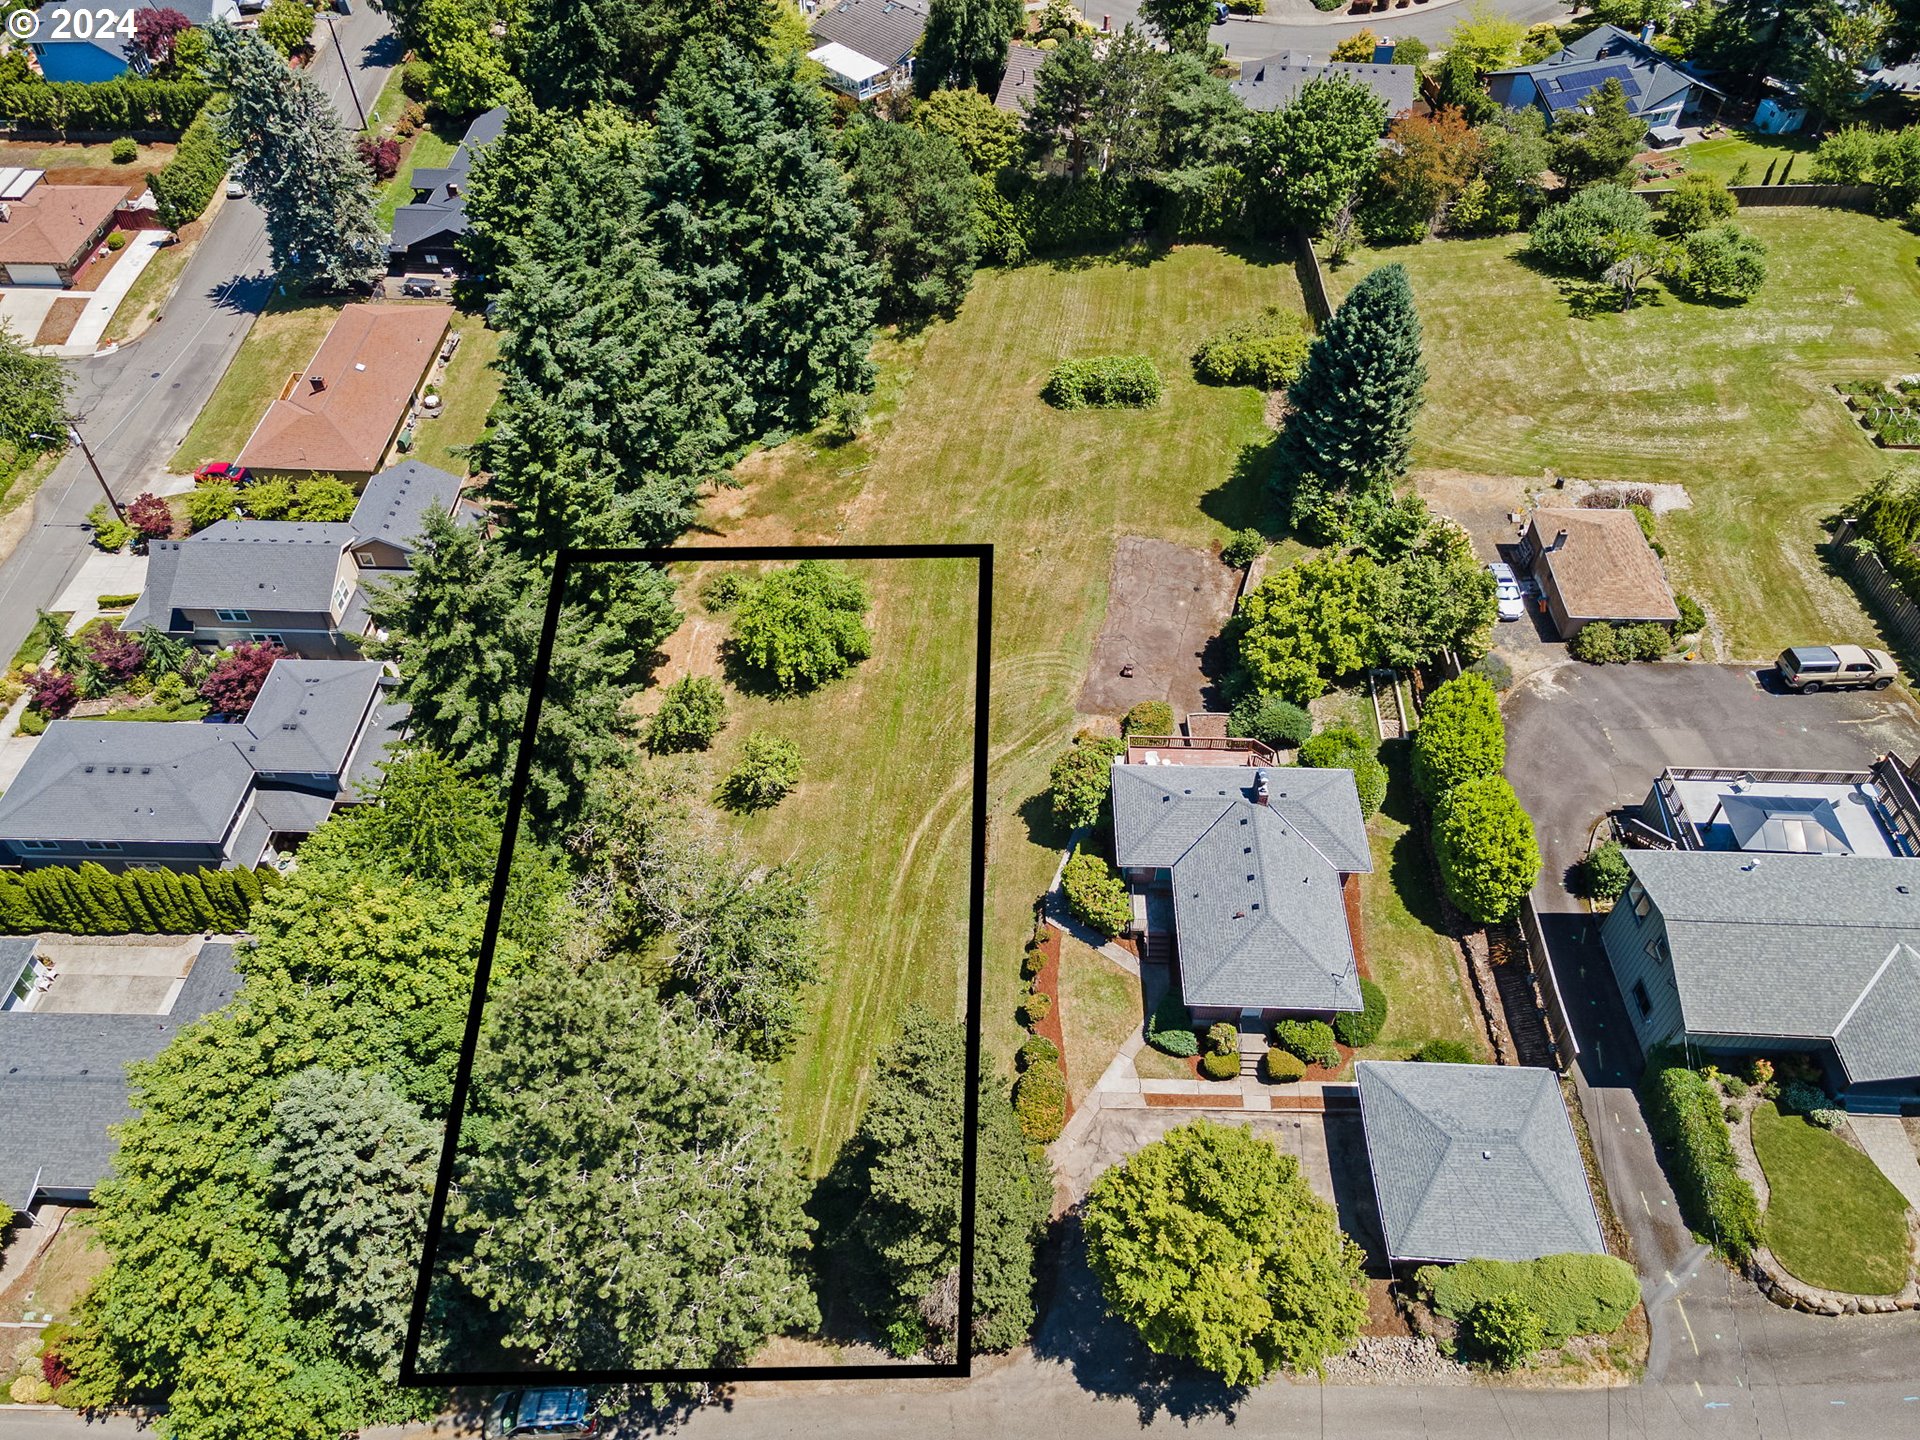 SW 29TH AVE Lot 3, Portland, OR 97219